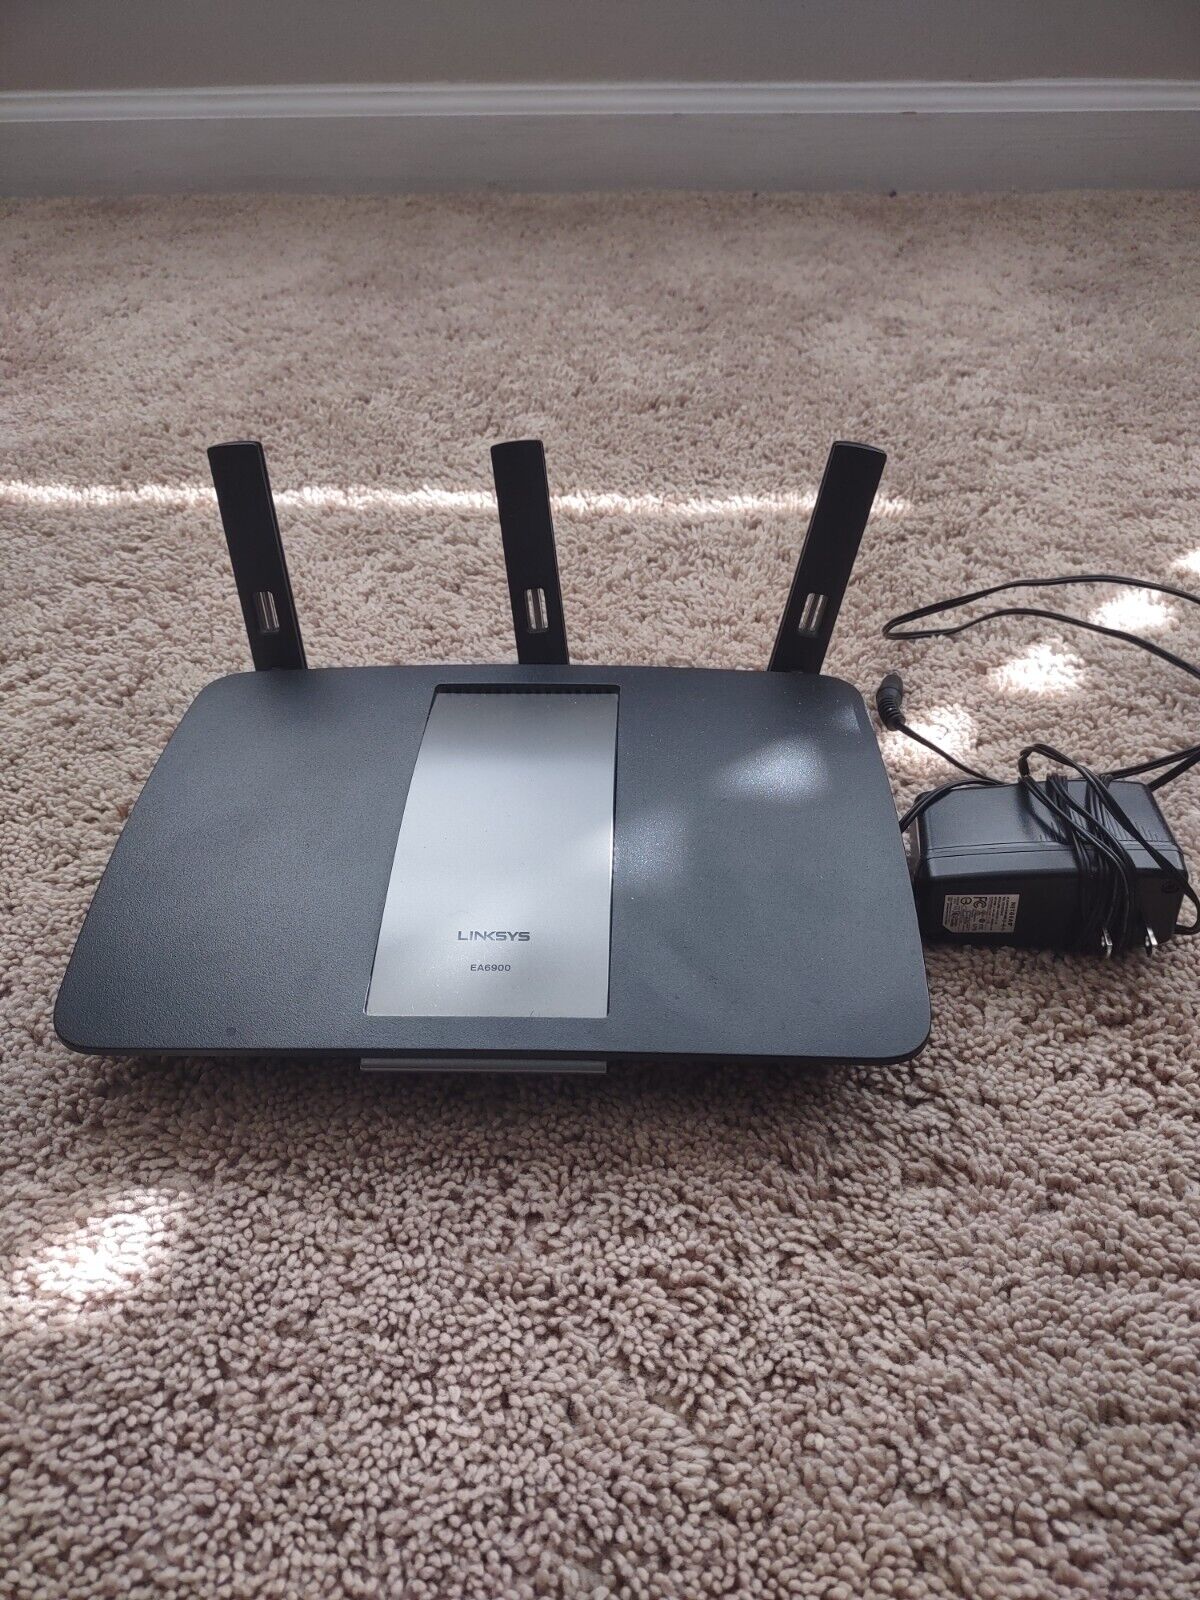 Linksys EA6900 Wireless Routers with Docsis 3.0 Modems - Black